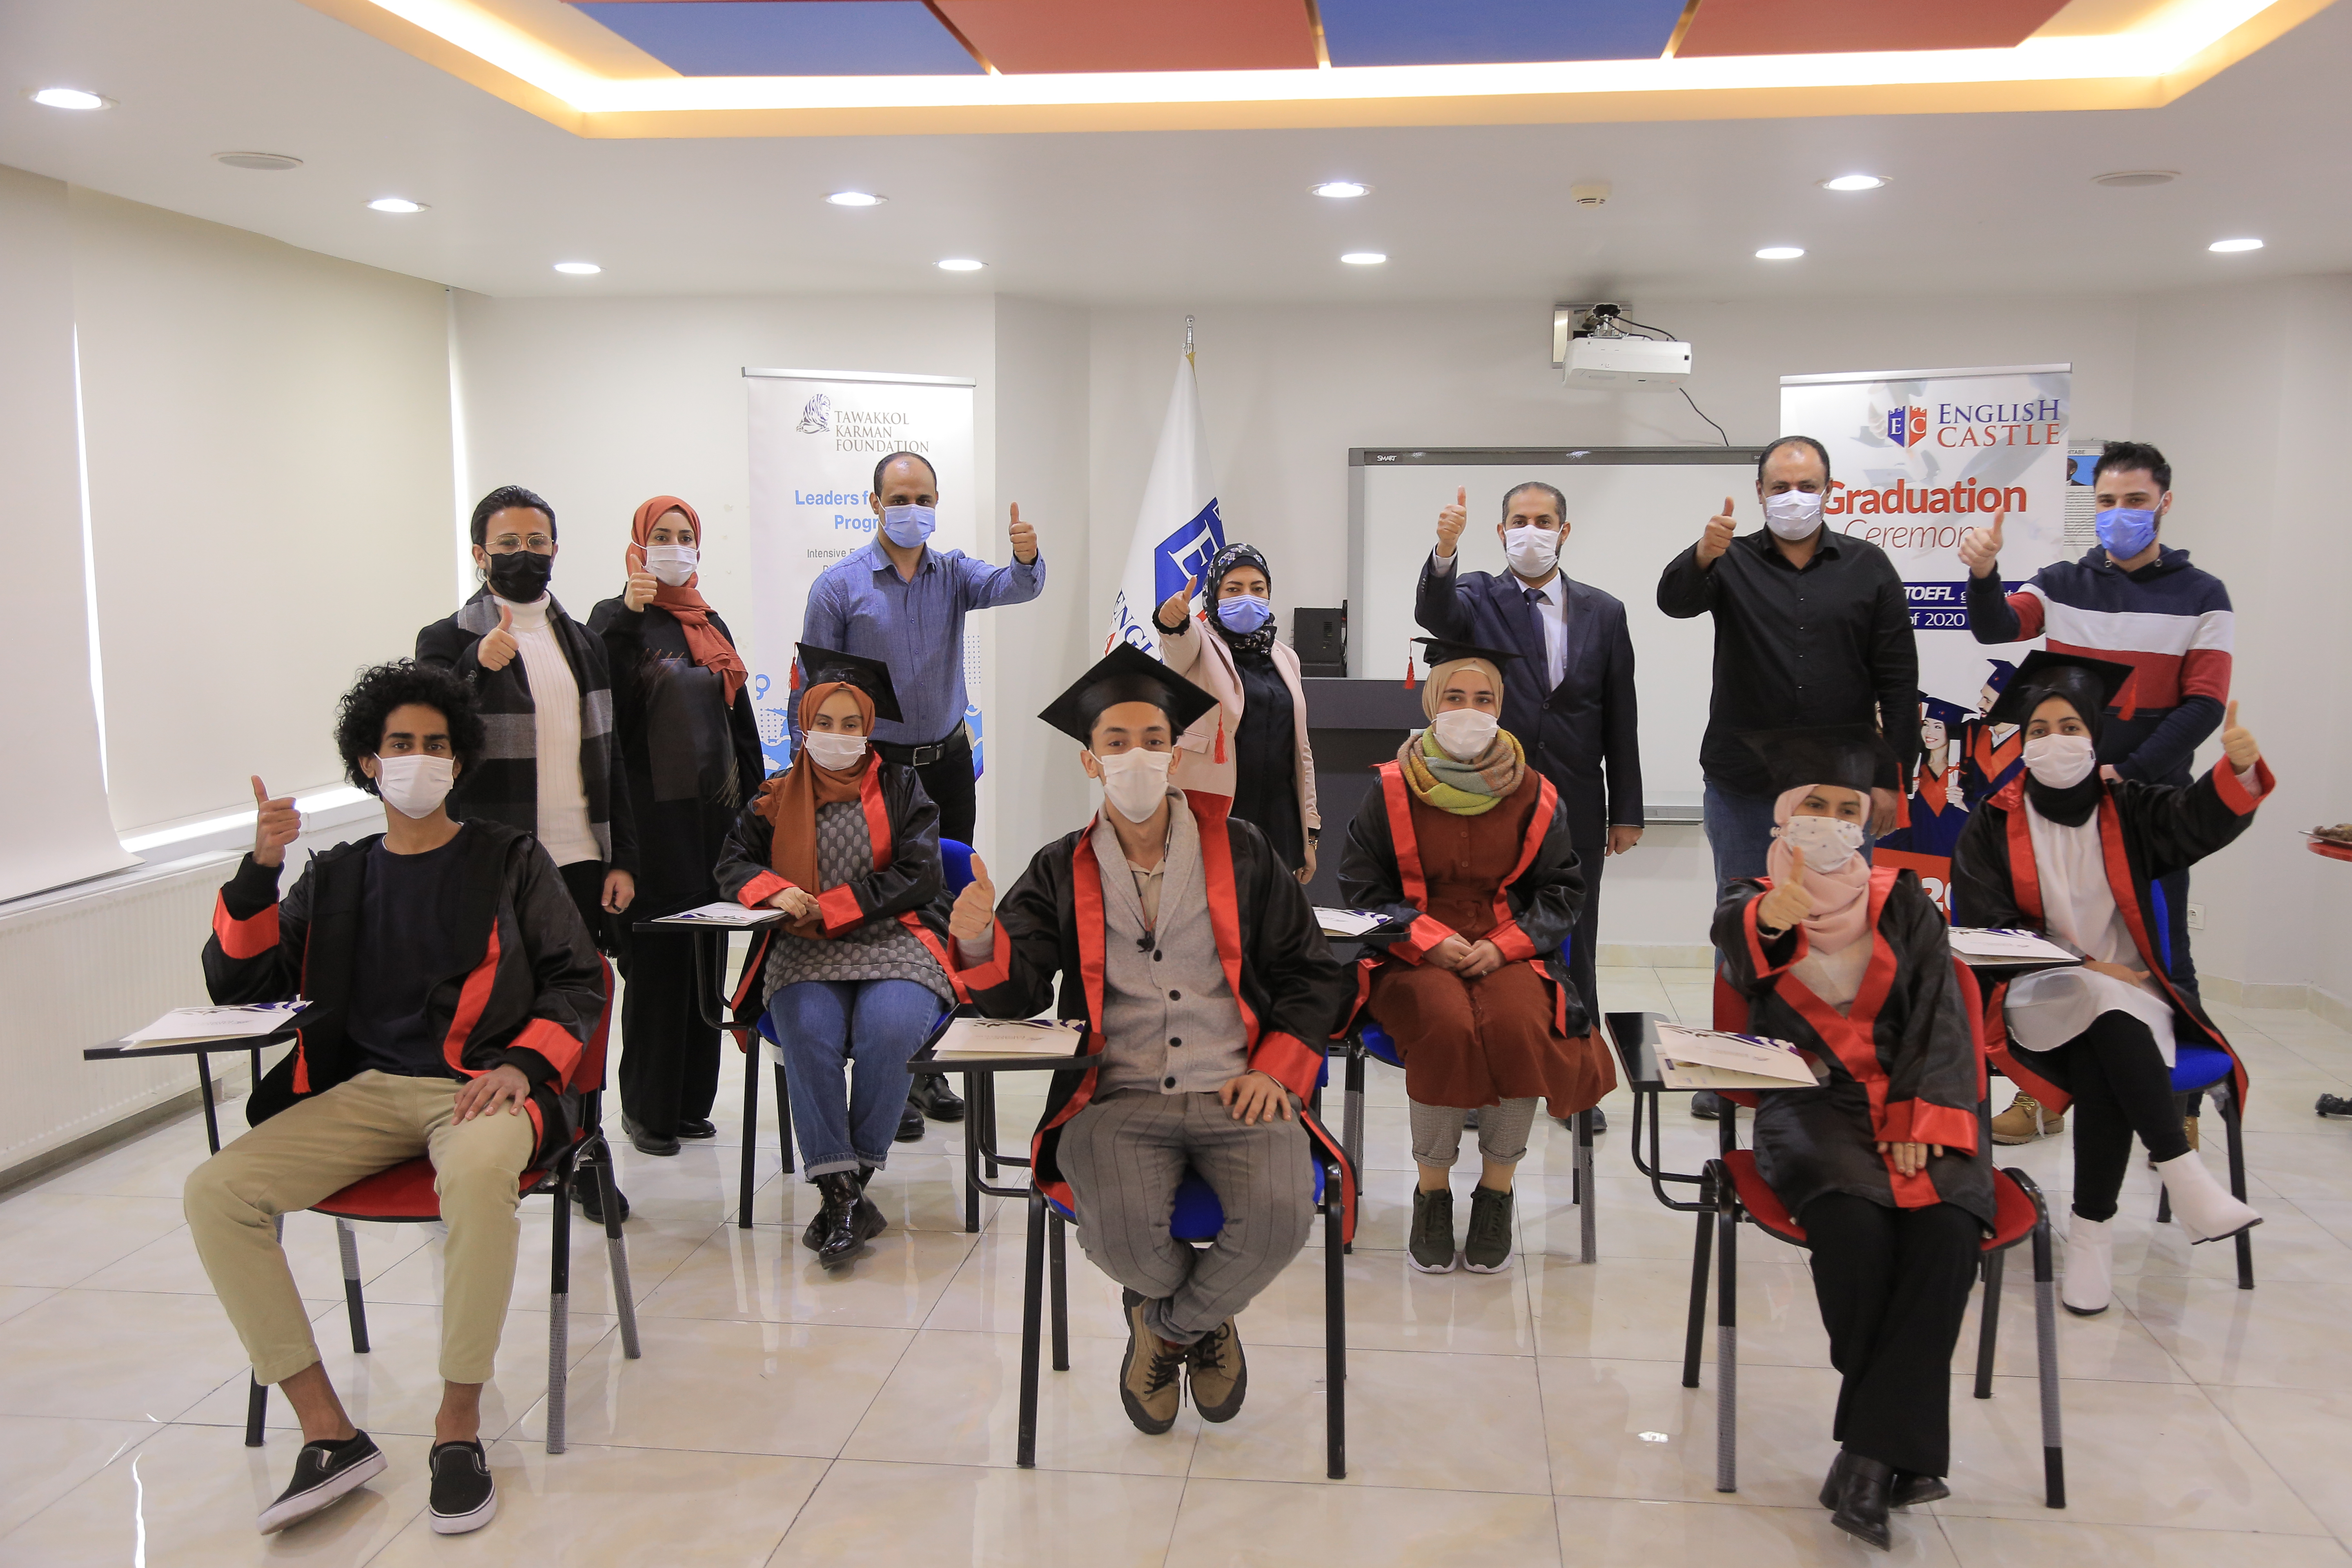 TKF celebrates the graduation of its first student group within the scope of the Leaders for Future Program